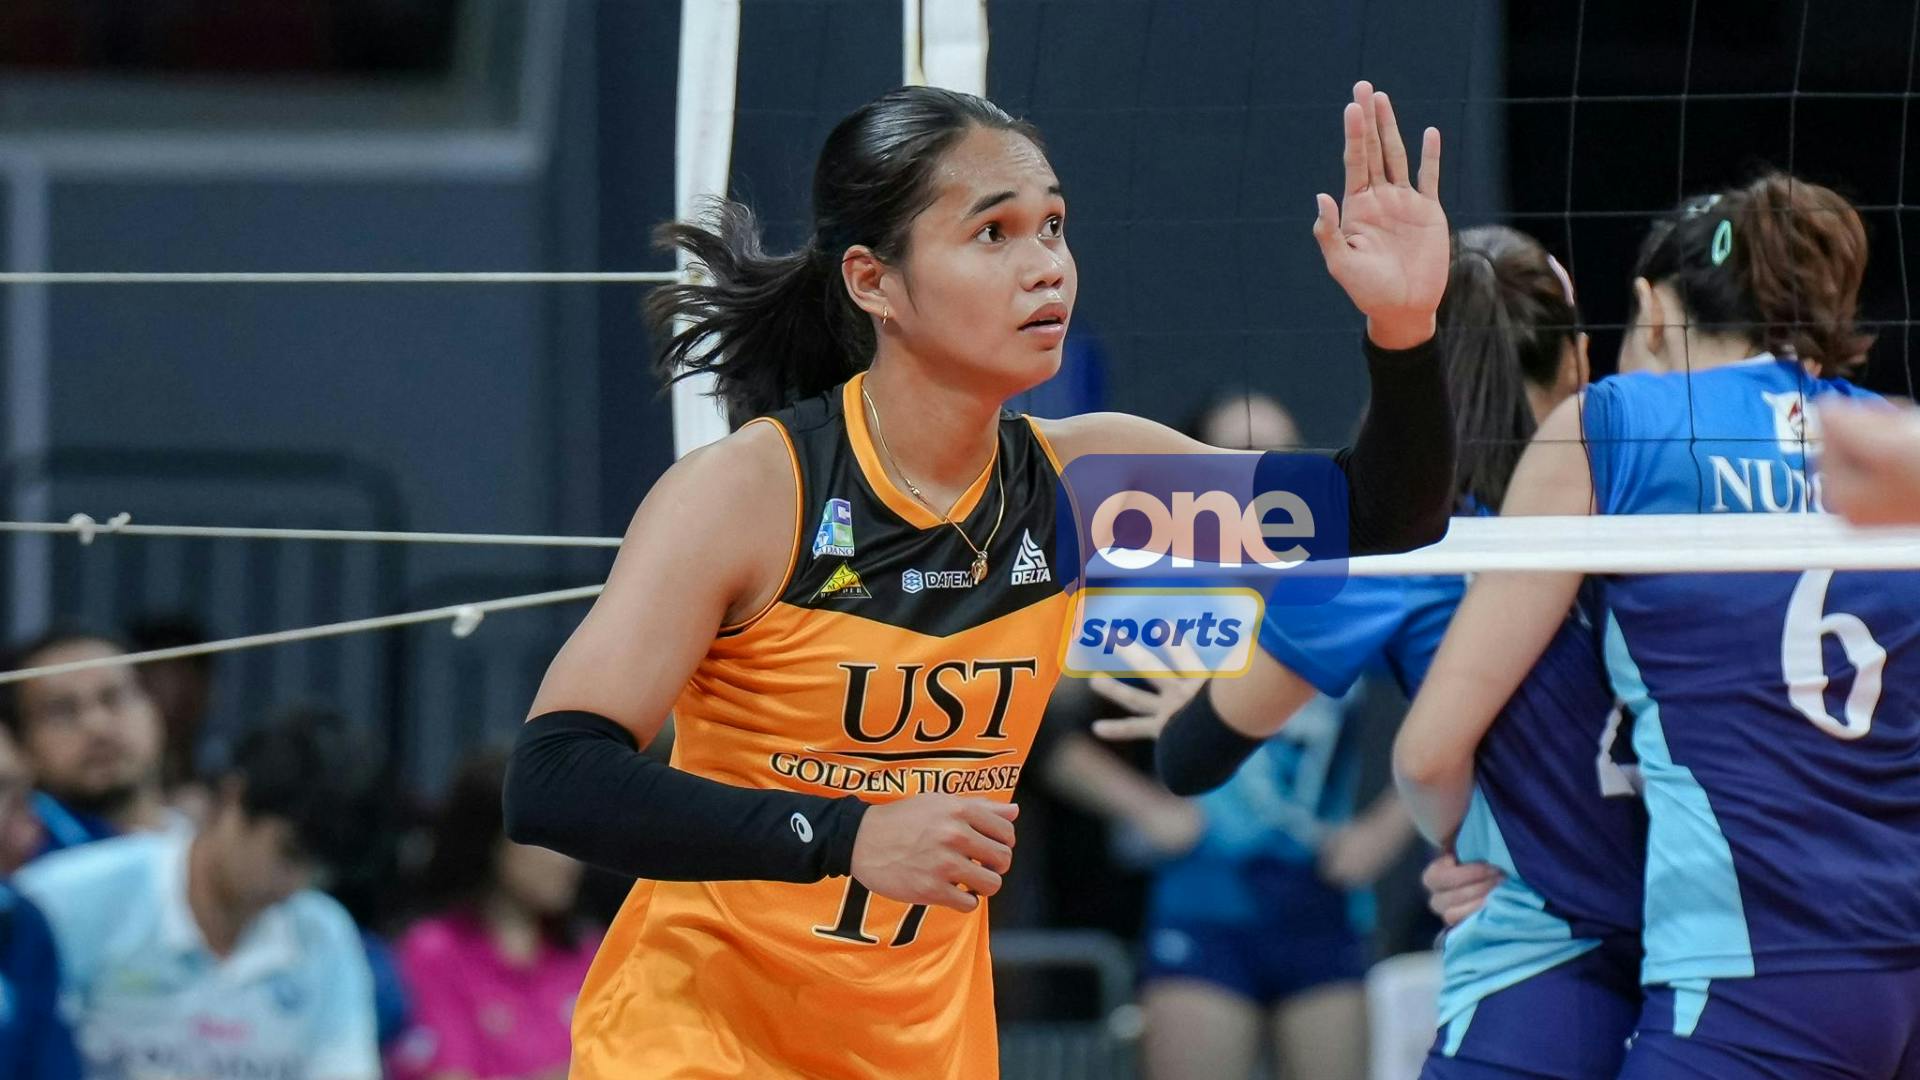 UAAP: Angge Poyos resets rookie scoring record to 31 as UST Golden Tigresses clinch Final Four slot